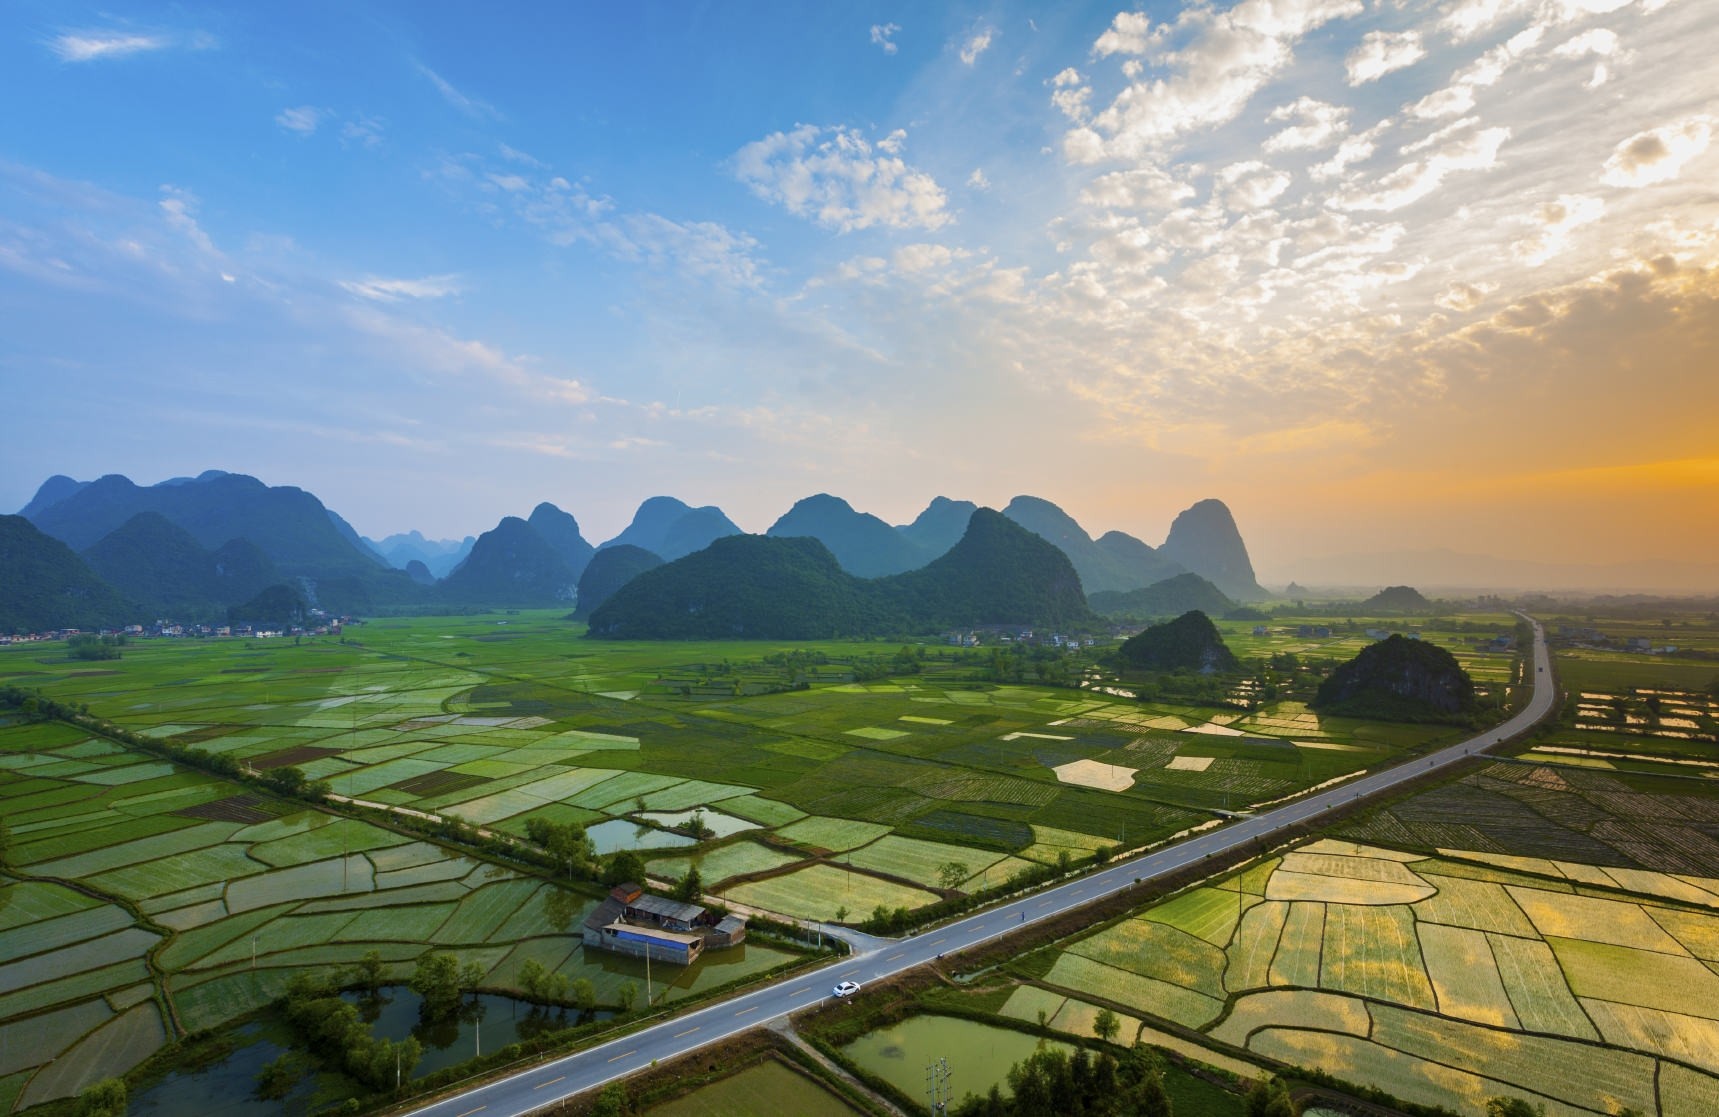 4535006-landscape-photography-nature-field-mountains-sunset-road-clouds-village-guilin-china-rice-paddy.jpg